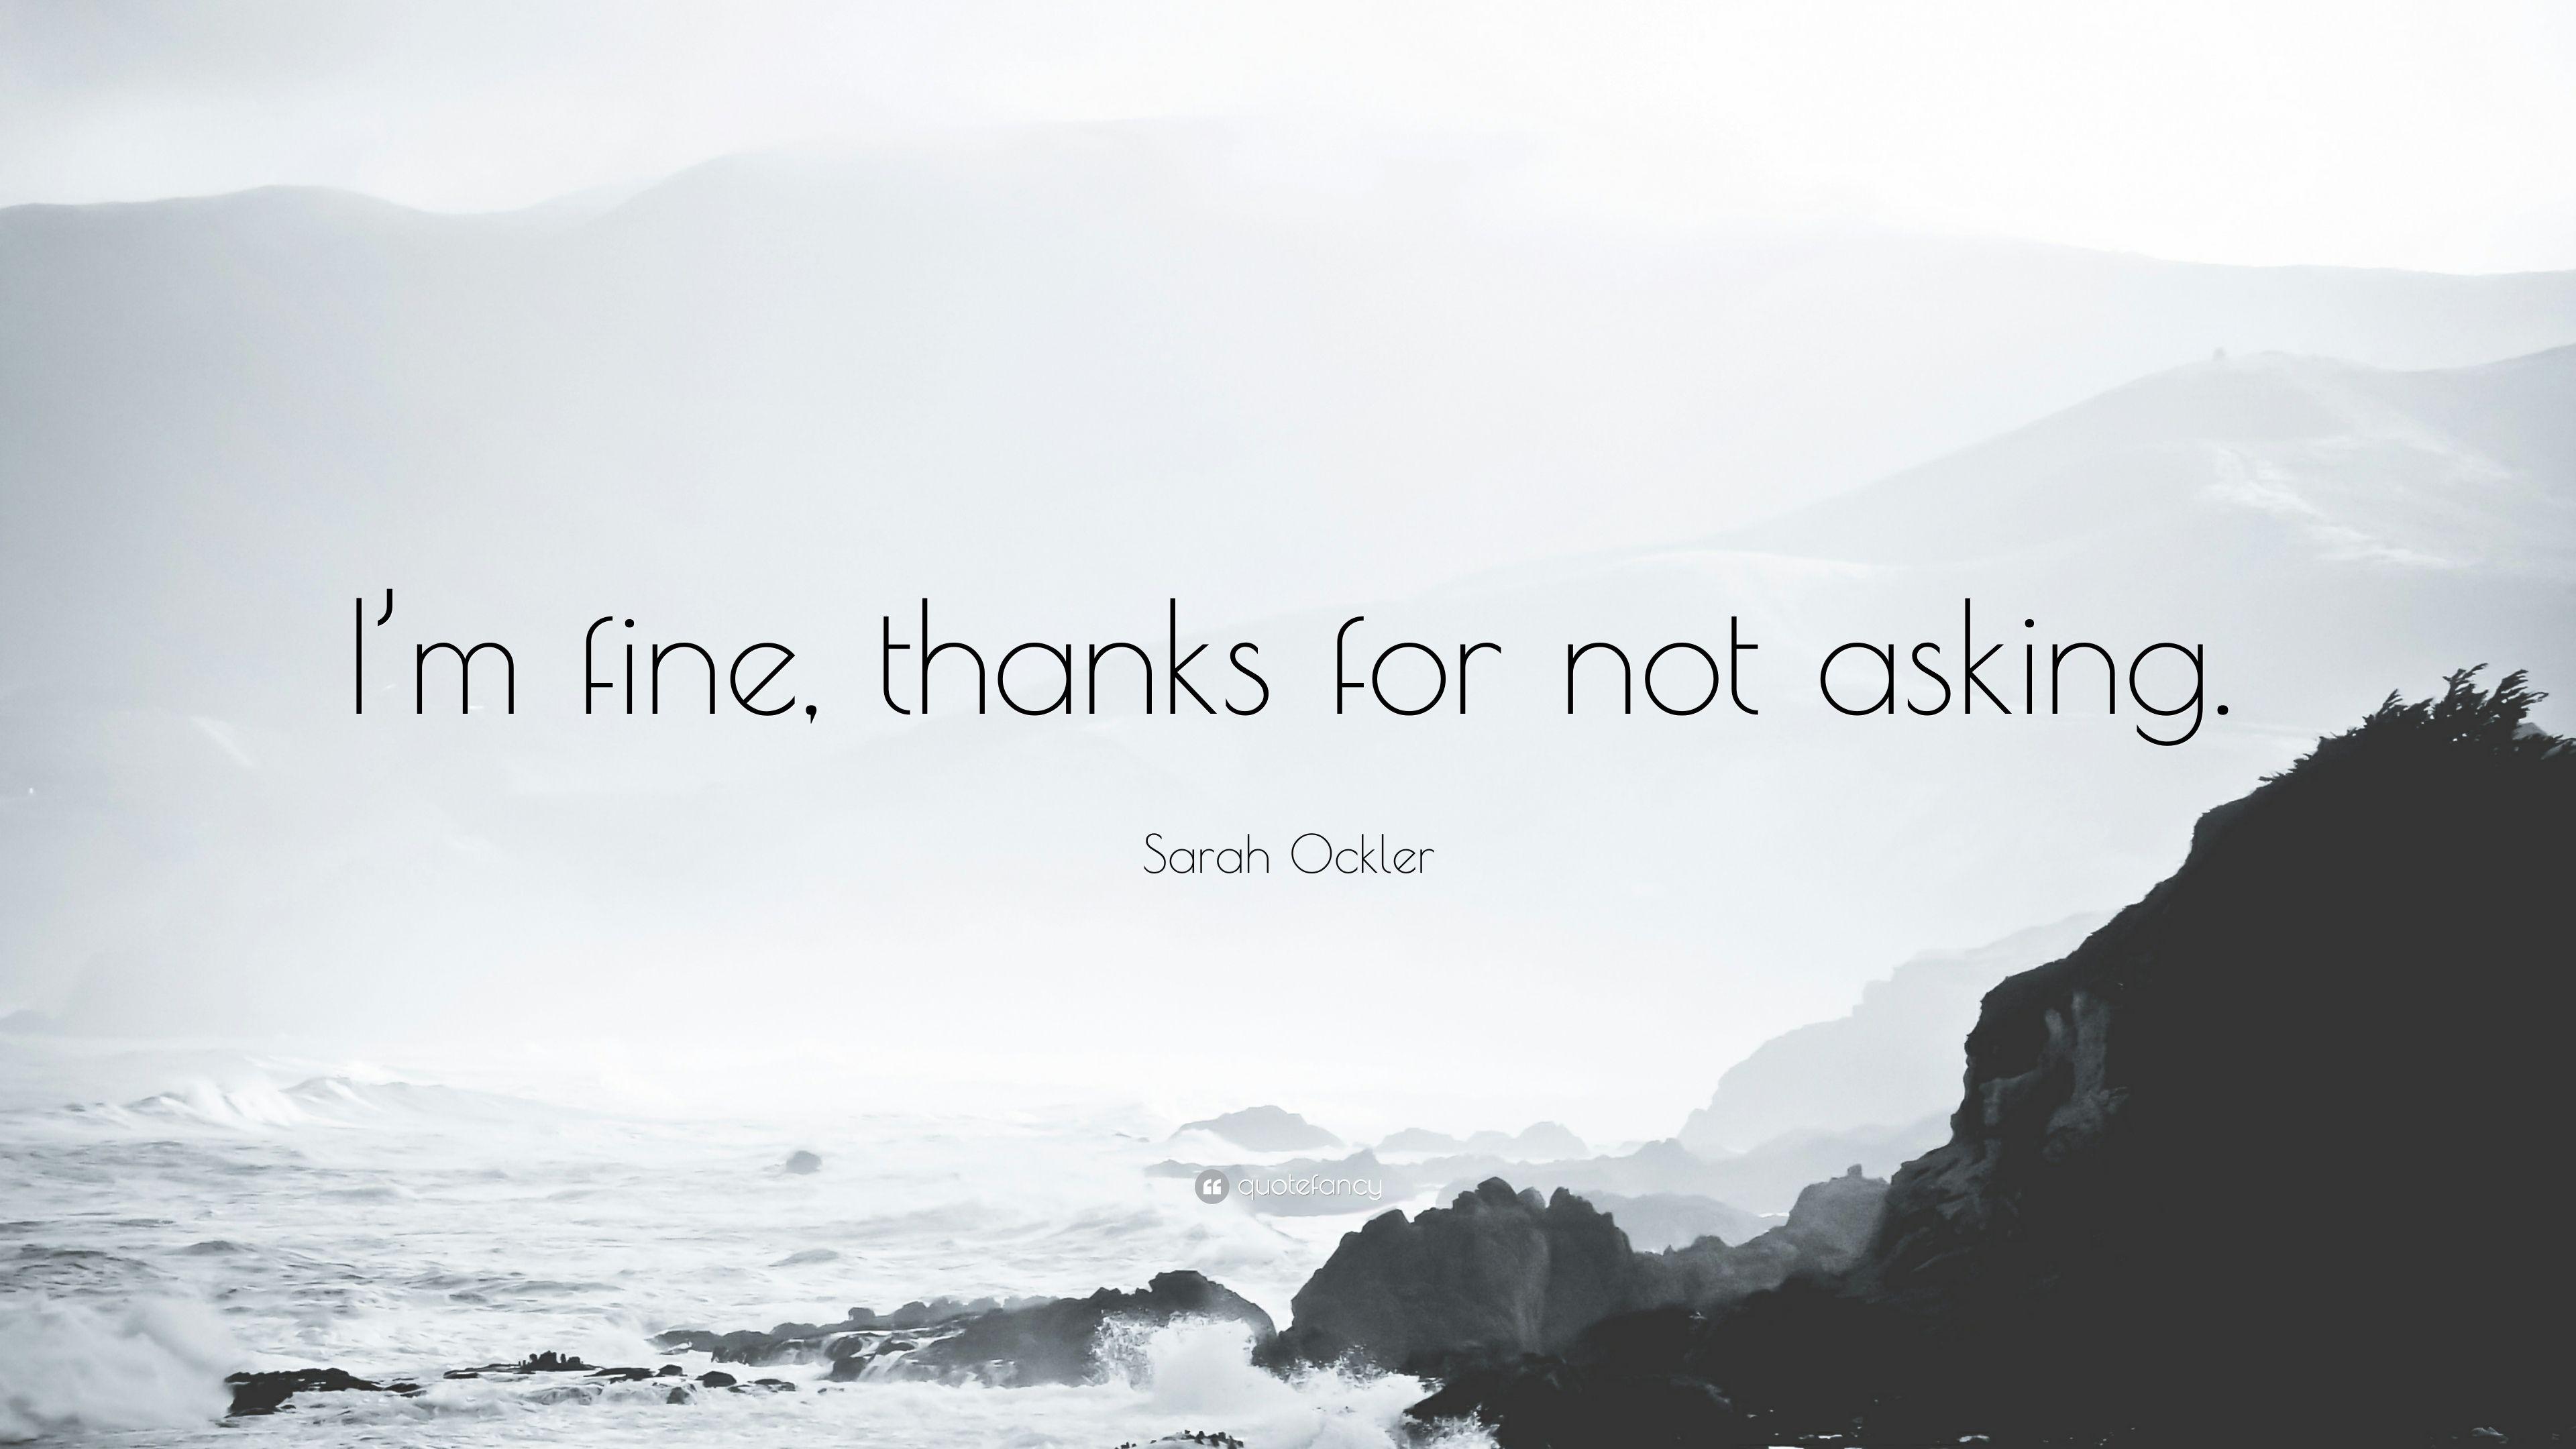 Sarah Ockler Quote: “I'm fine, thanks for not asking.” 12